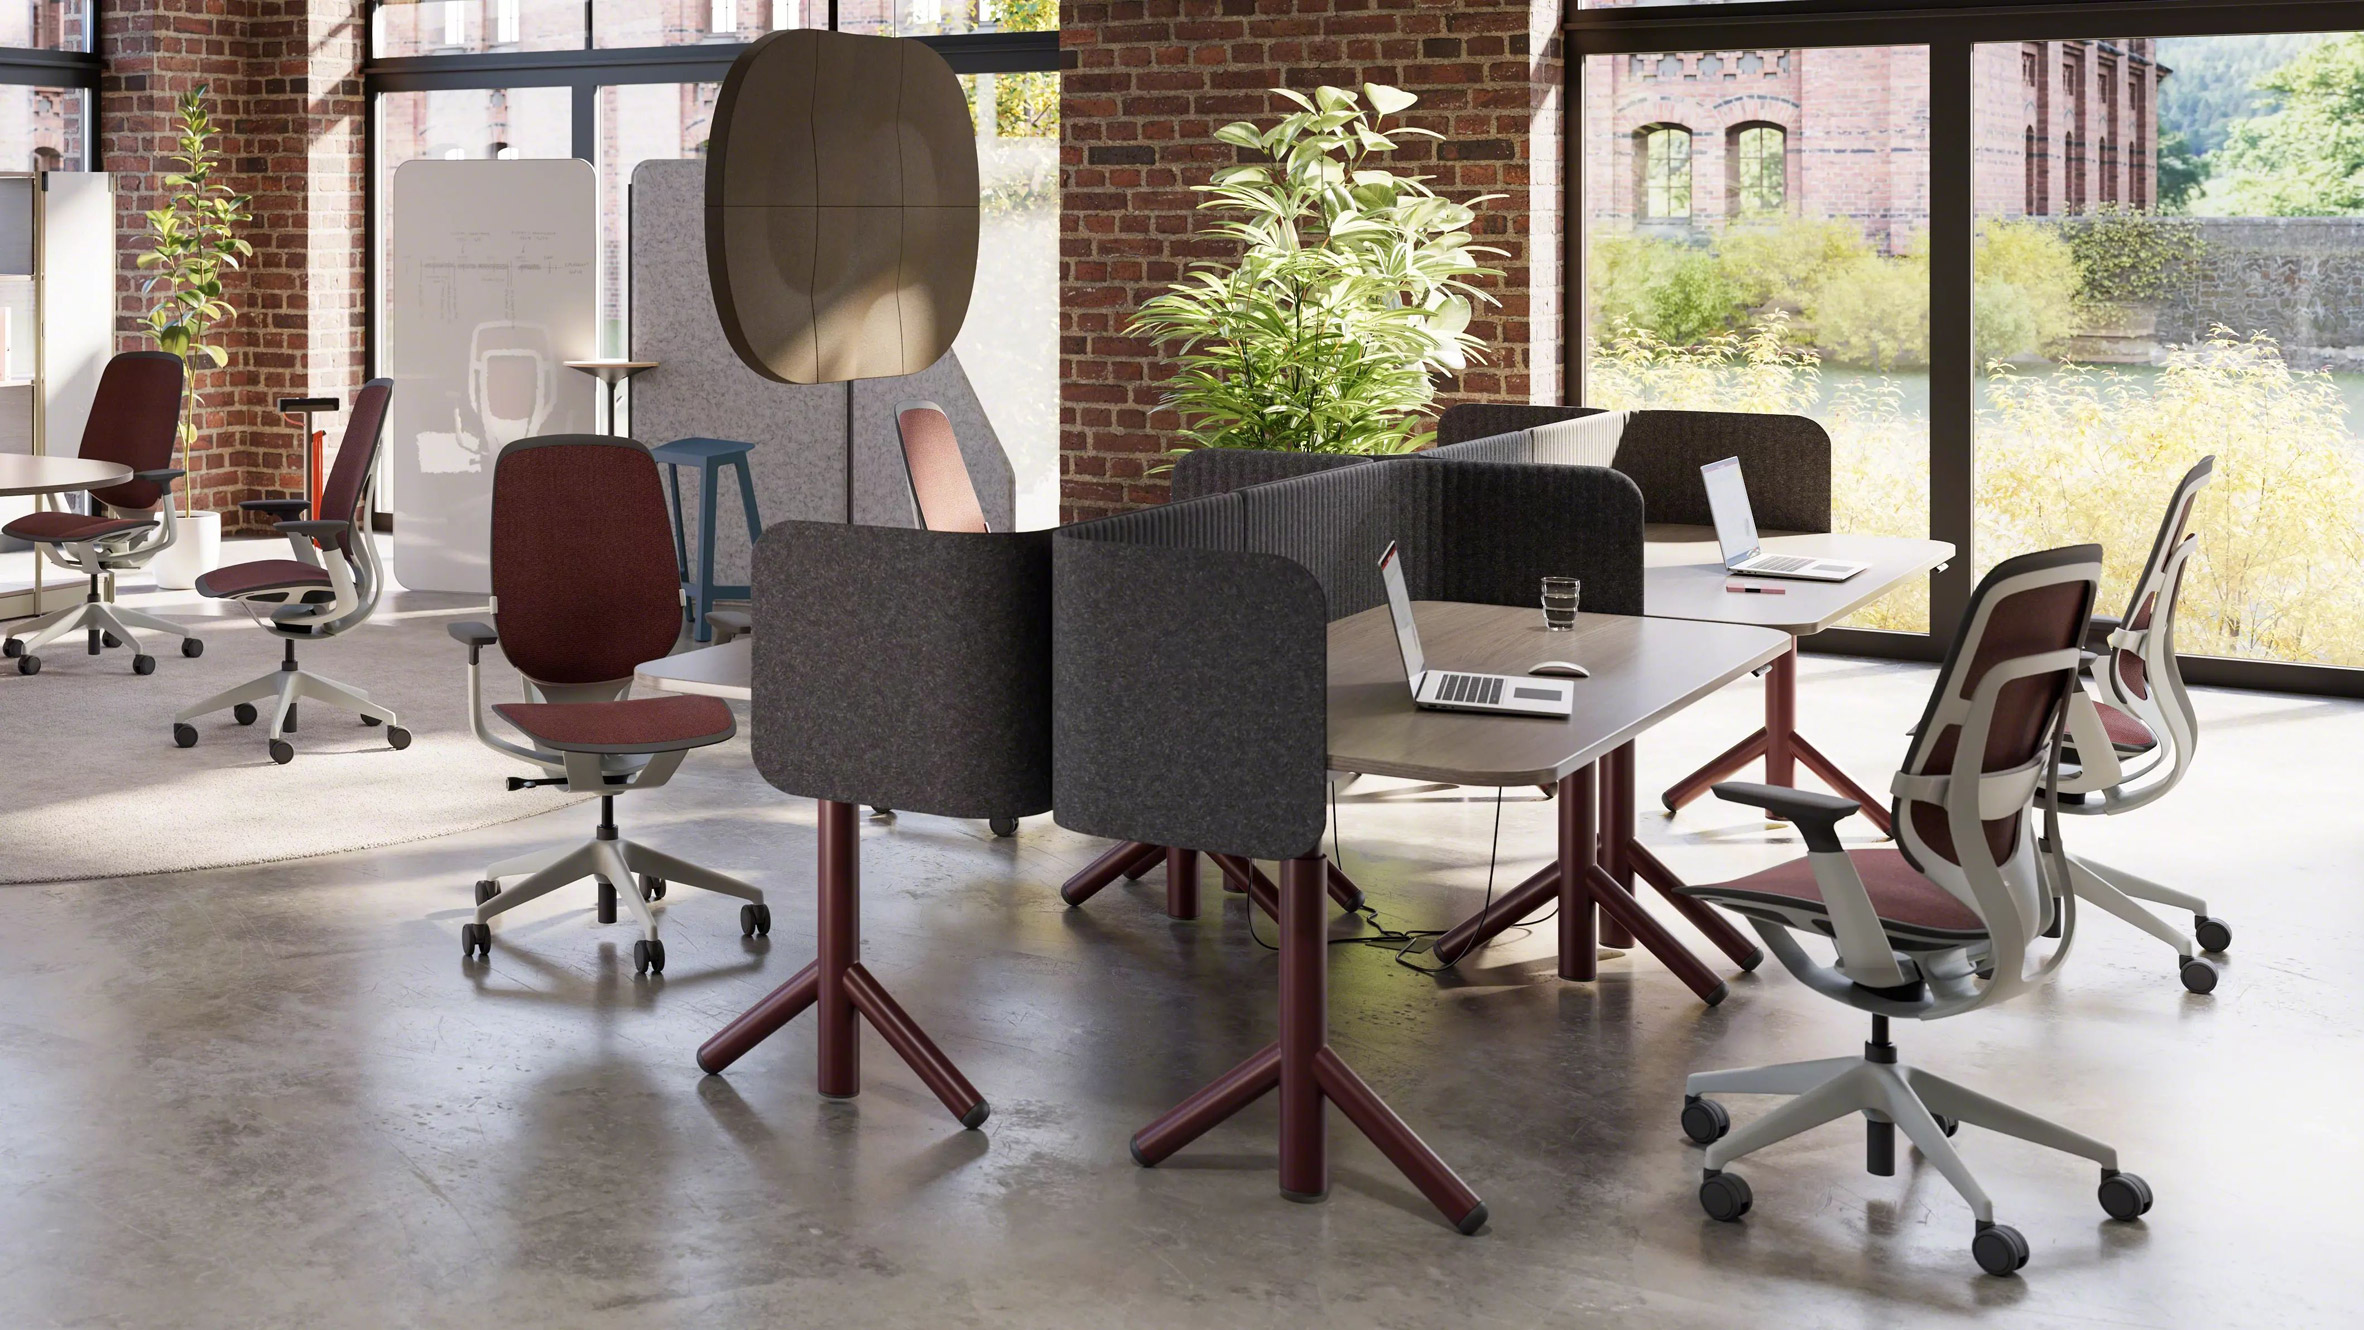 Steelcase Karman chairs in office